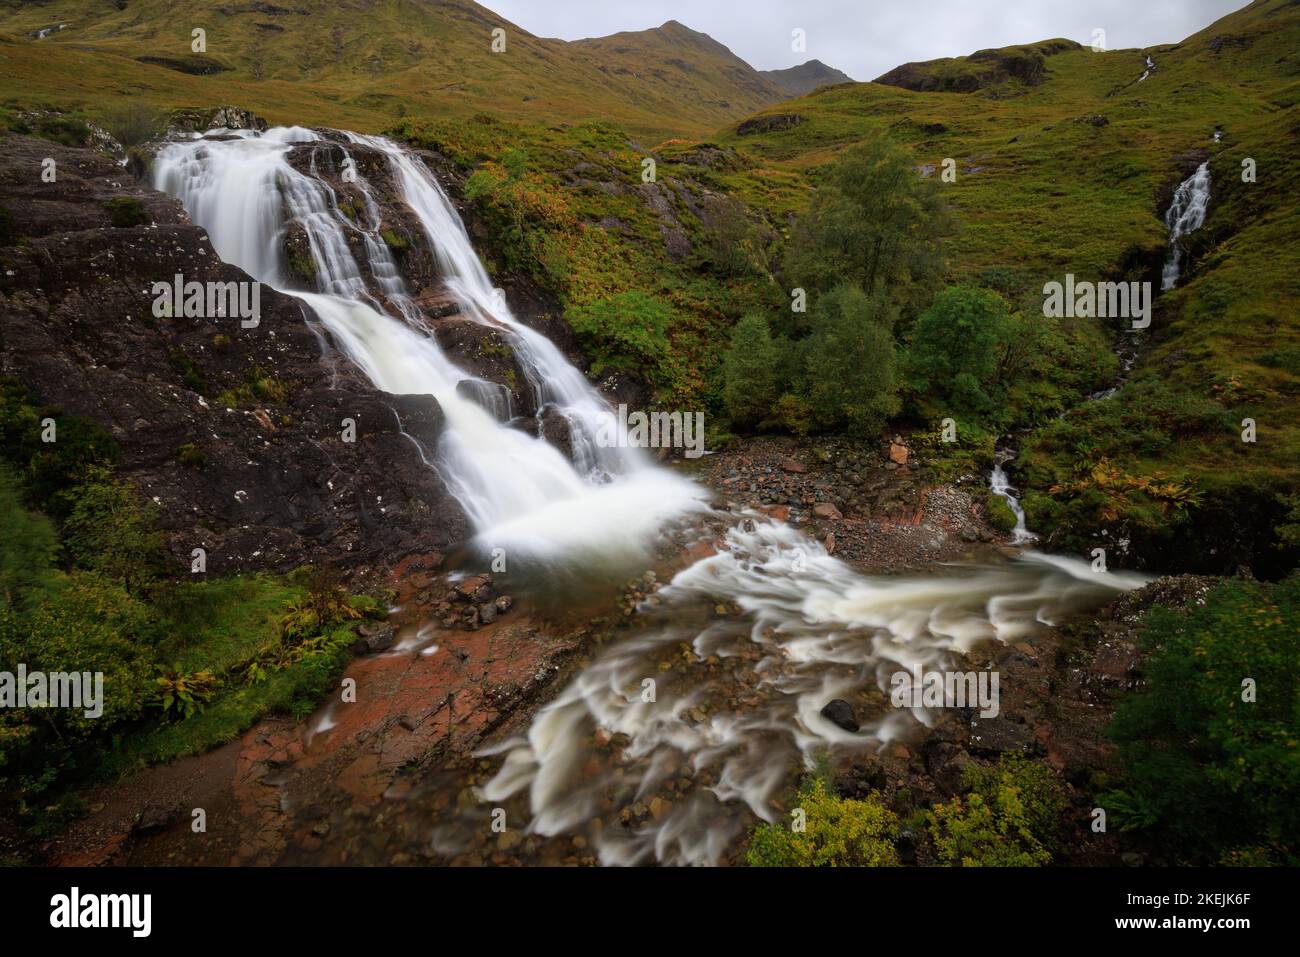 The Meeting of three waters at the foot of The Three Sisters of Glencoe, Scotland, UK Stock Photo